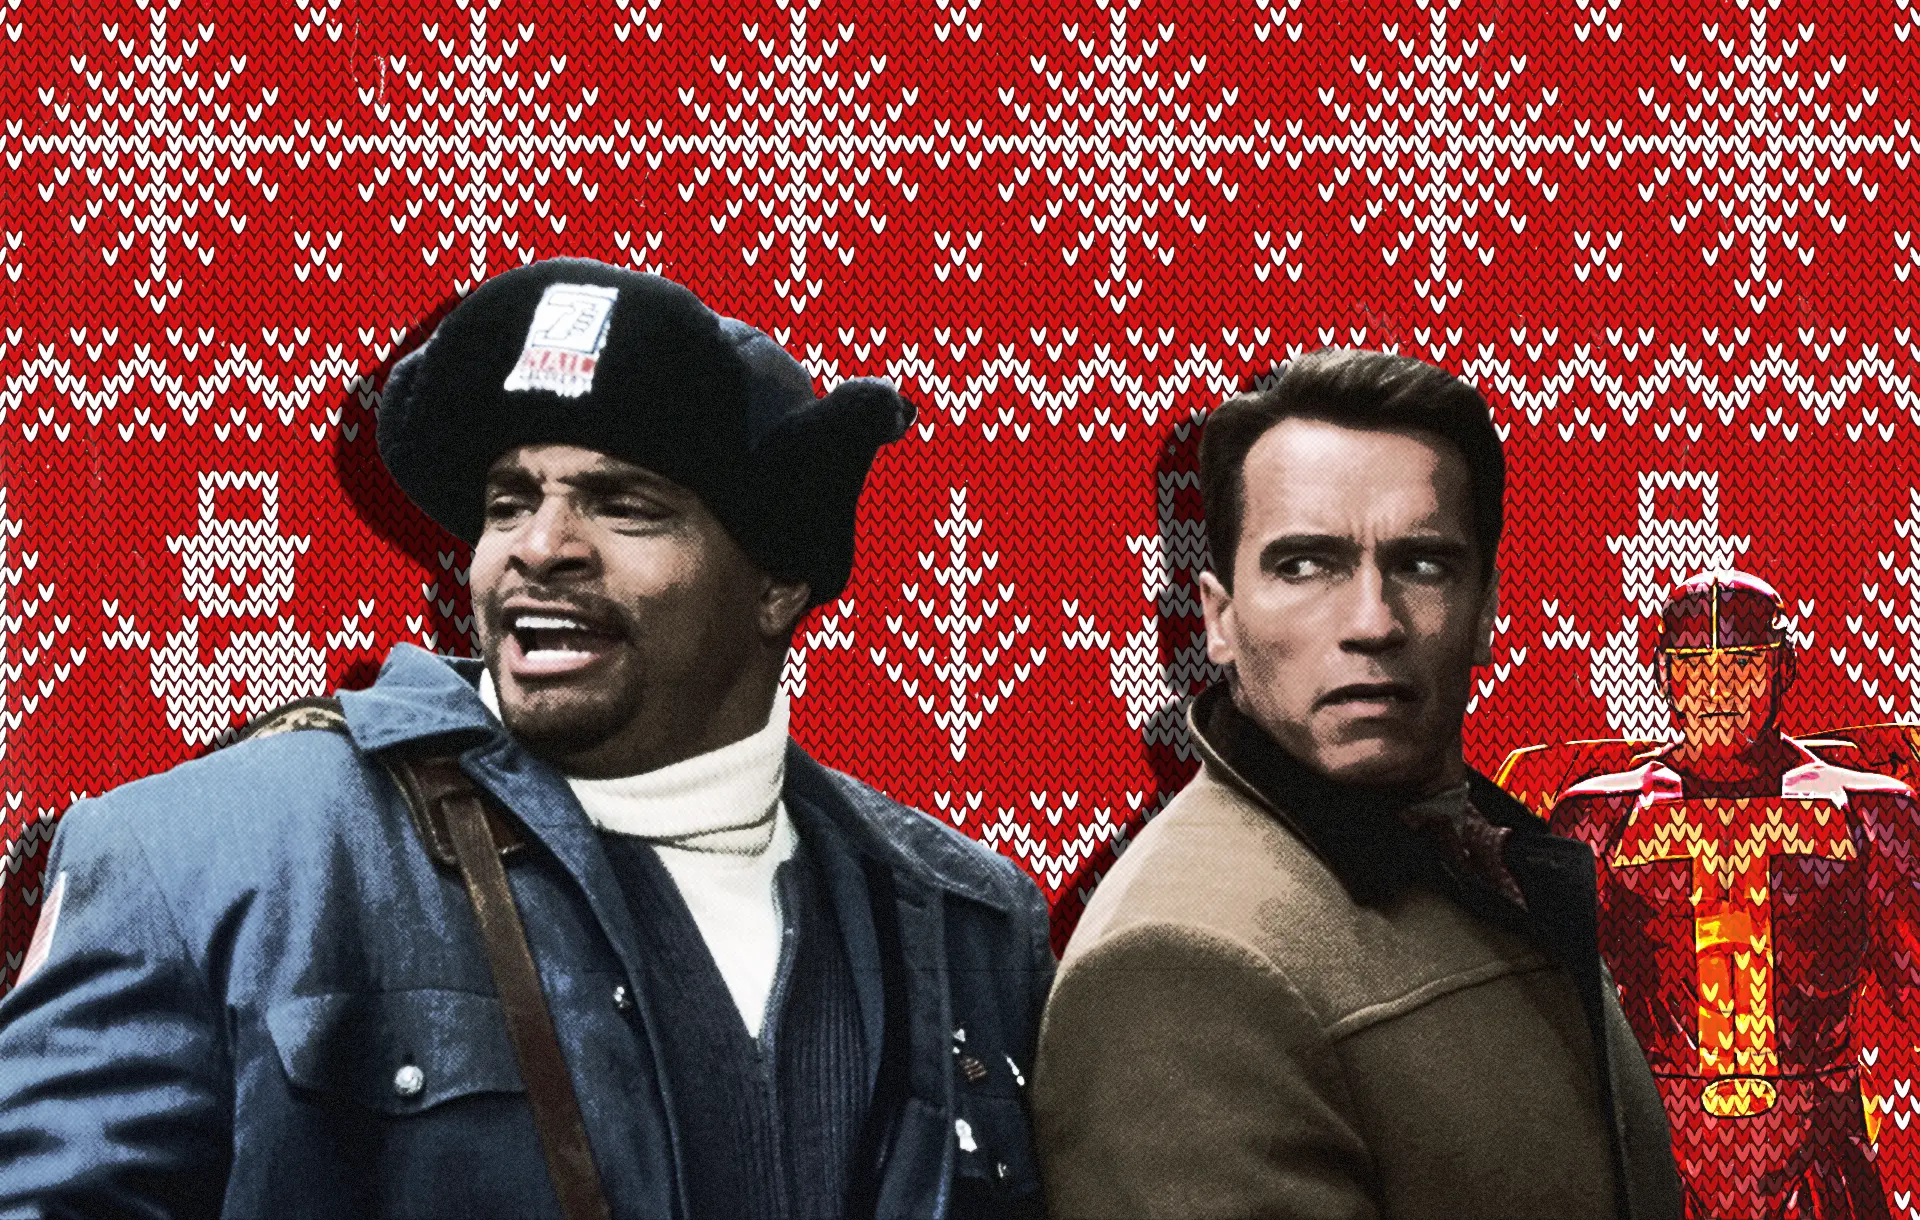 25 Years Later: Schwarzenegger's 'Jingle All The Way' Still Endures As Some Sort of Holiday Classic | Features | LIVING LIFE FEARLESS